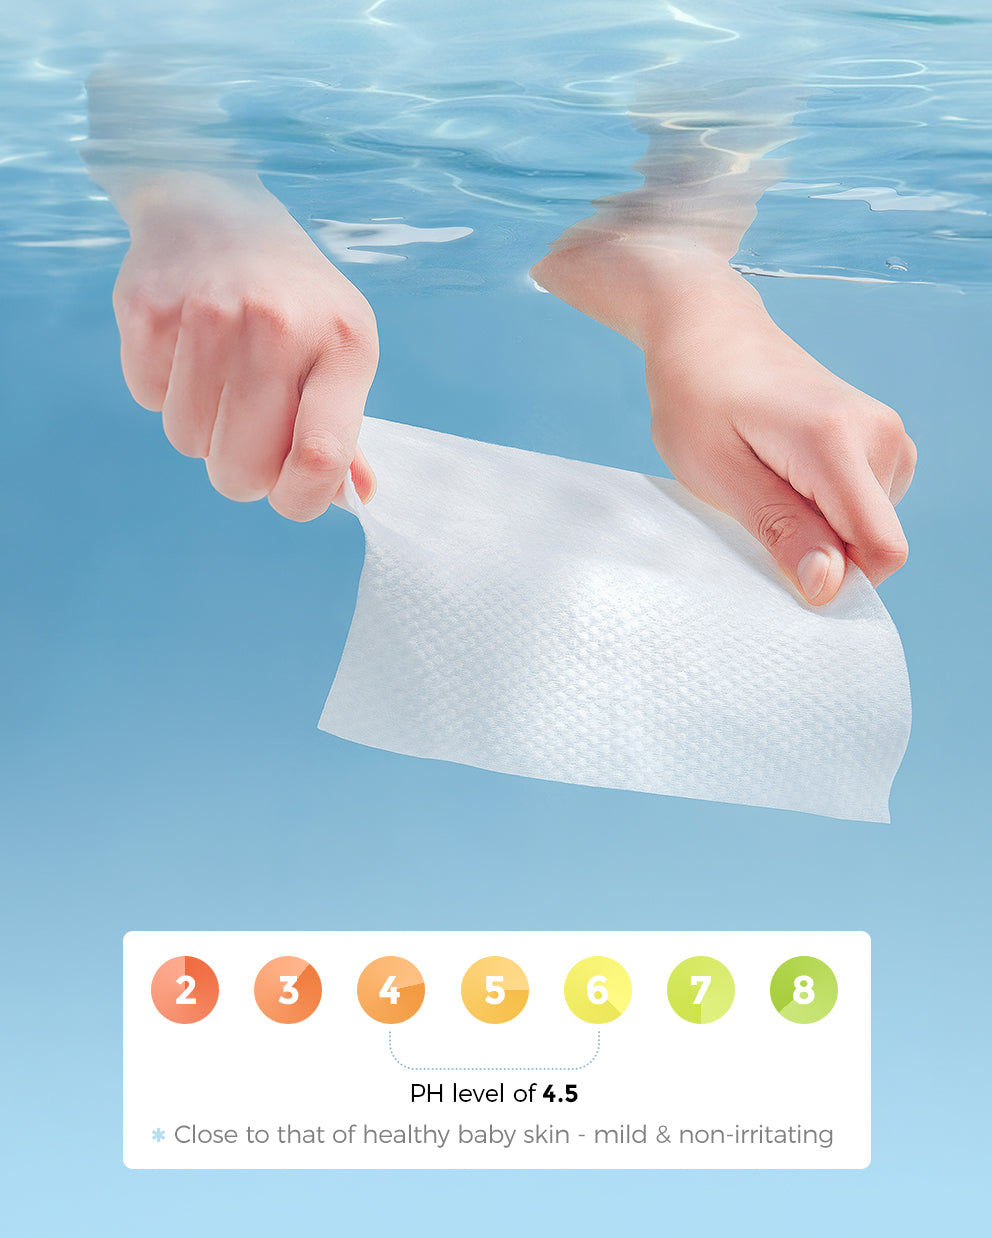 99% Water Wipes - Higher Level of Purity